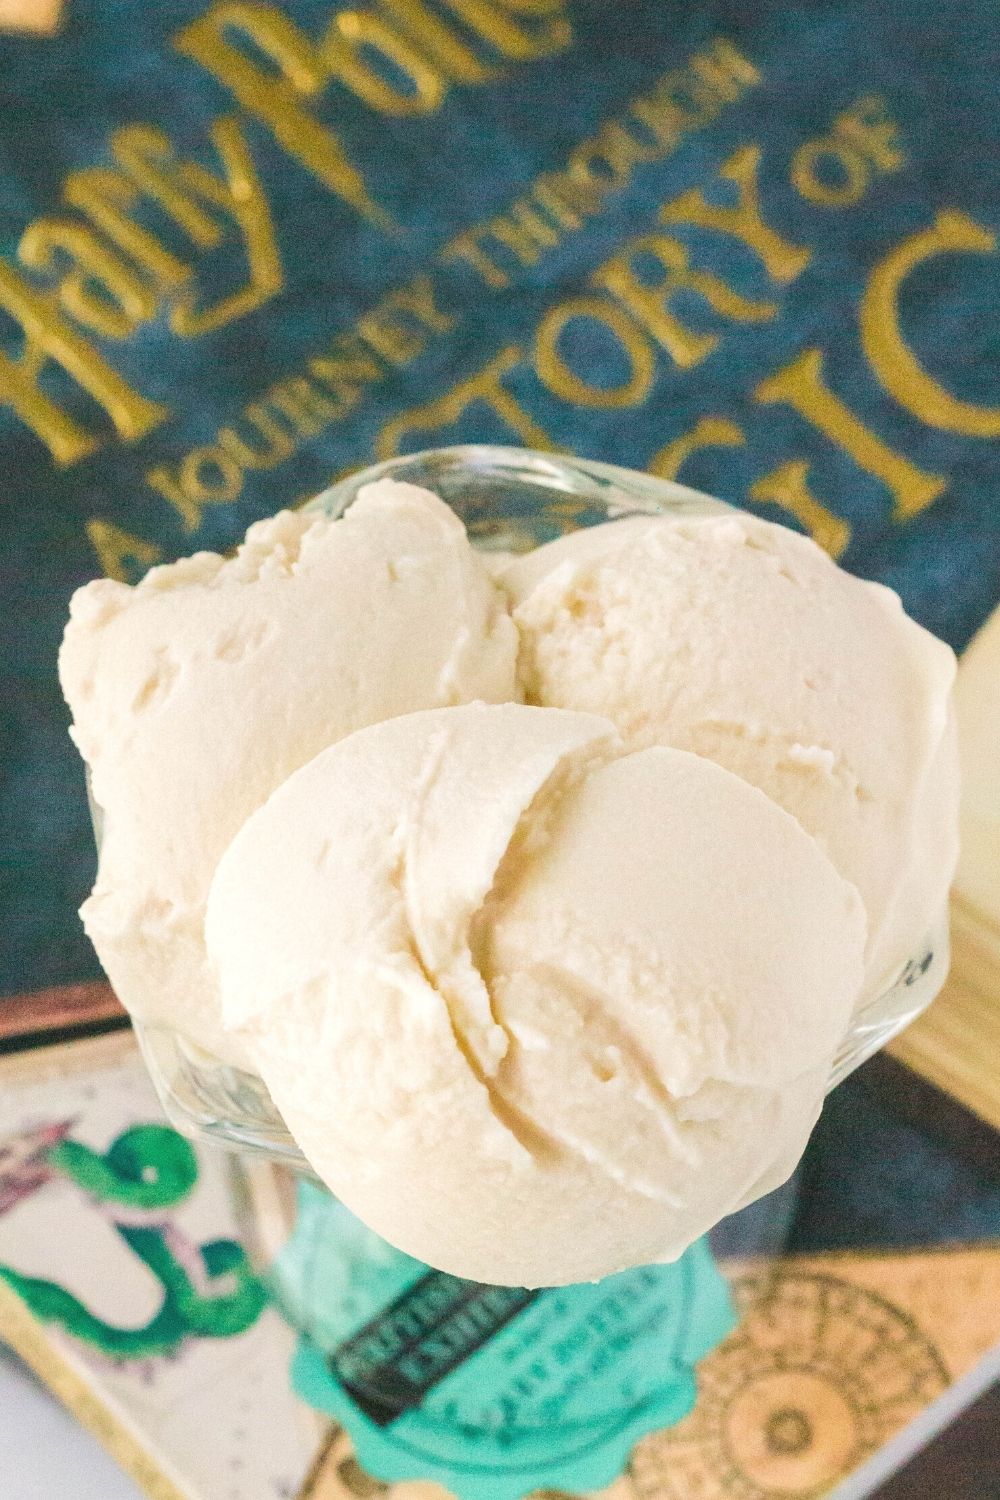 three scoops of Ninja Creami butterbeer ice cream served in a glass dessert cup next to a Harry Potter book